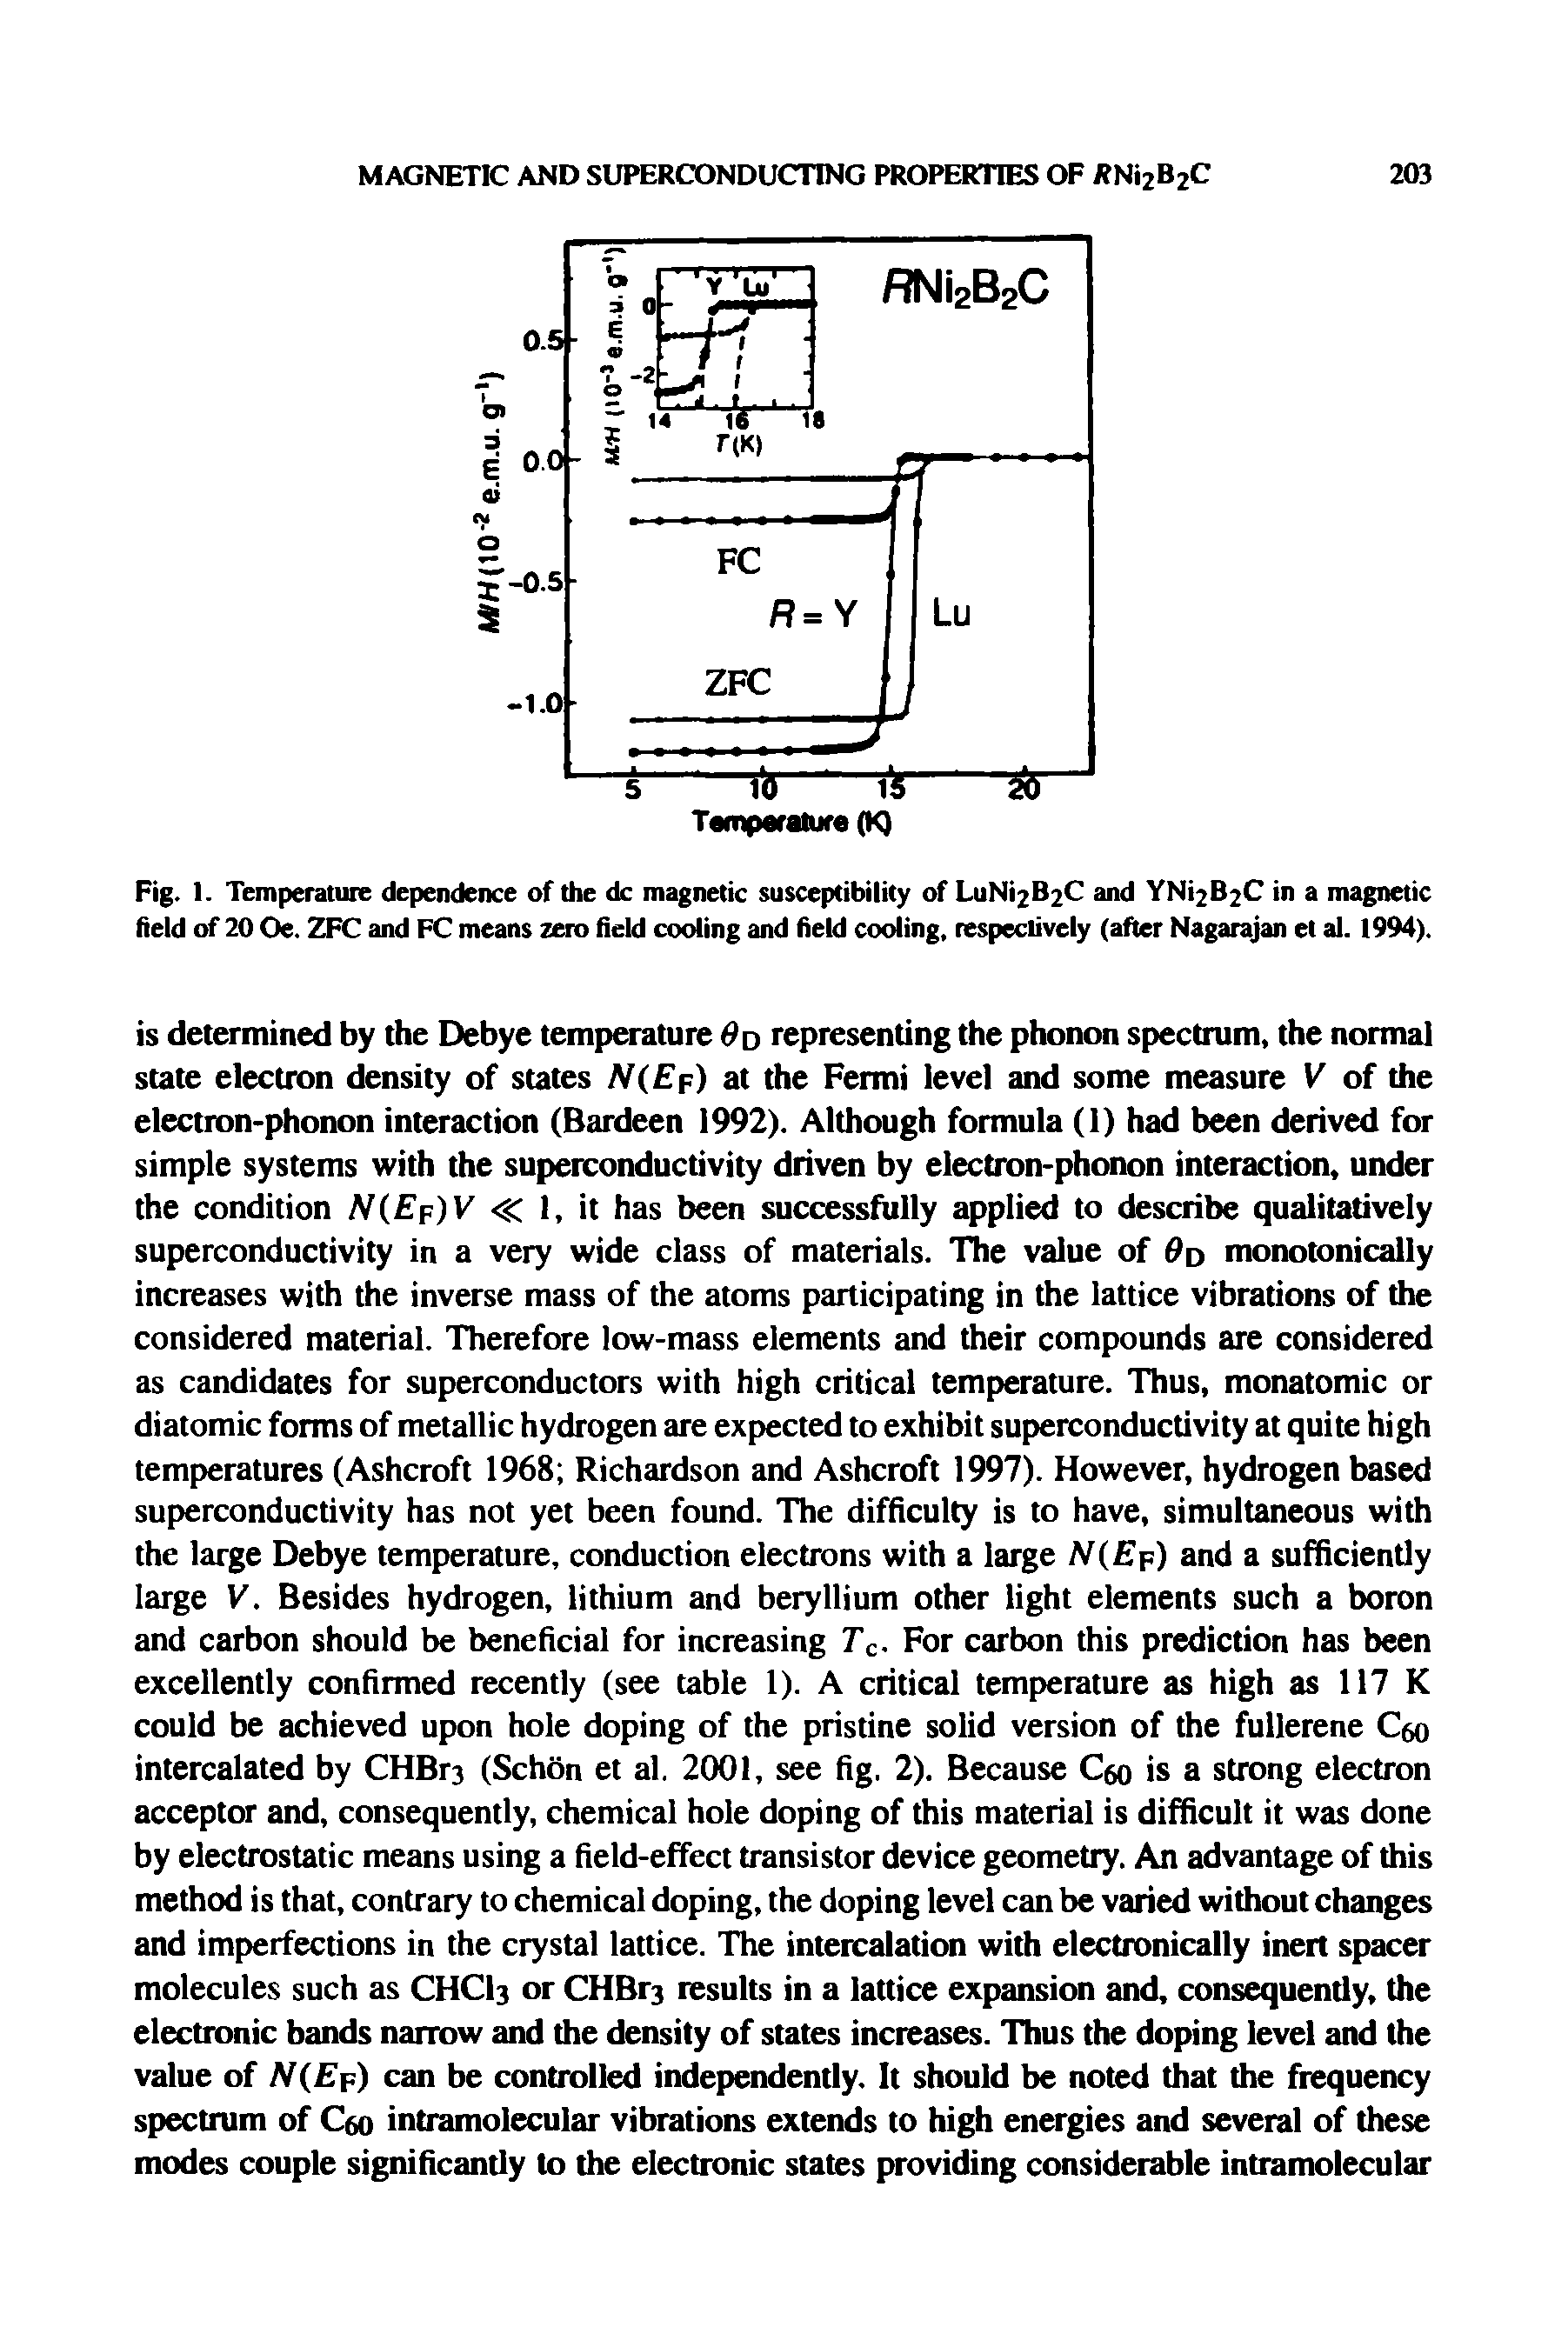 Fig. 1. Temperature dependence of the dc magnetic susceptibility of LuNi2B2C and YNi2B2C in a magnetic field of 20 Oe. ZFC and FC means zero field cooling and field cooling, respectively (after Nagarajan et al. 1994).